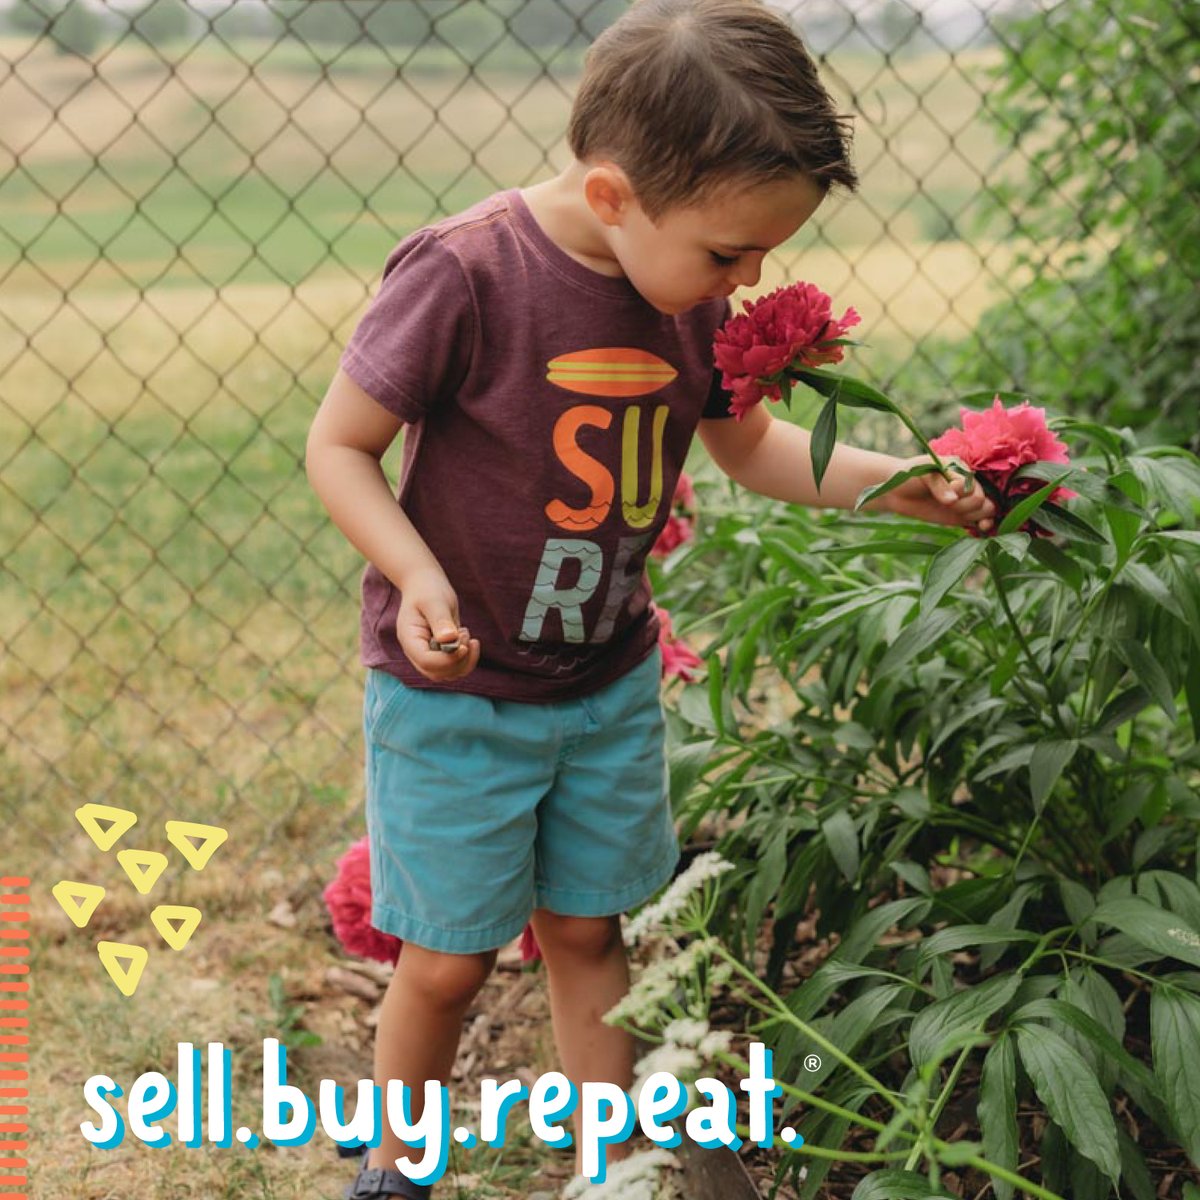 Once Upon A Child: where sustainable meets affordable. Stop into your local store to shop our great selection of kids’ stuff priced way less or earn cash on the spot when you sell their gently used items! #SellBuyRepeat #OnceUponAChild